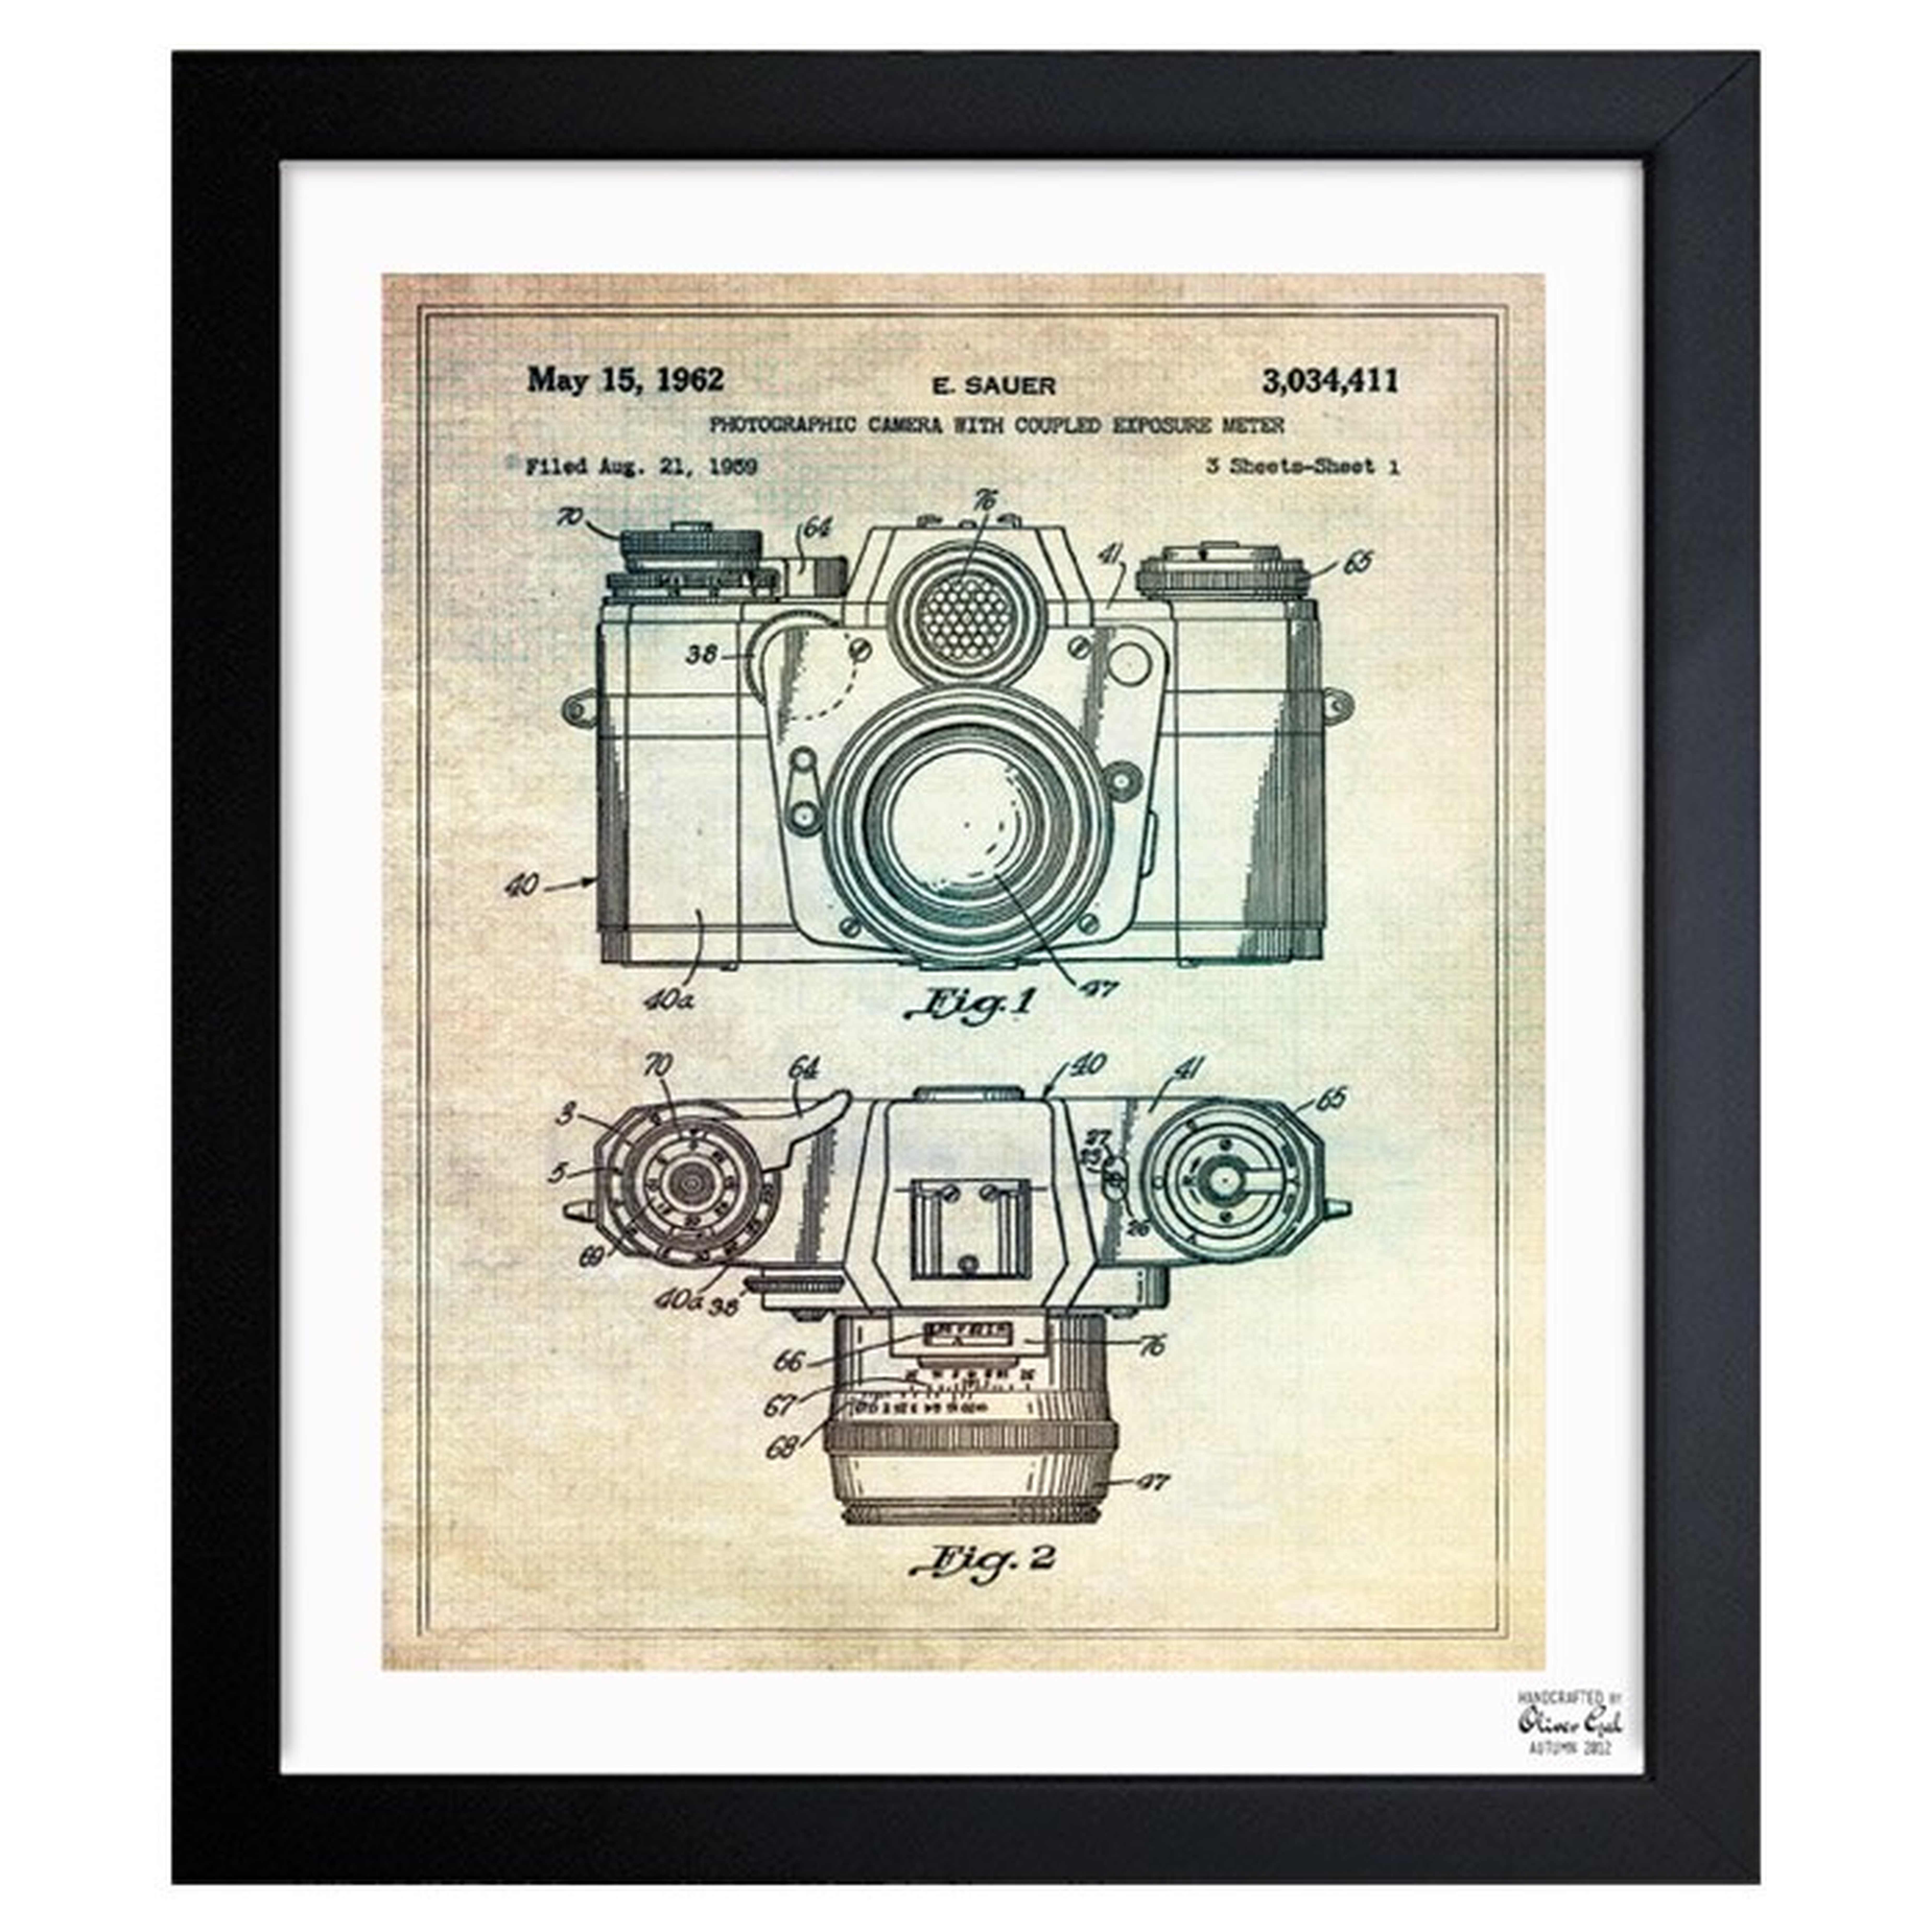 "Sauer Photographic Camera 962" - Wrapped Canvas Graphic Art Print on Canvas - Wayfair